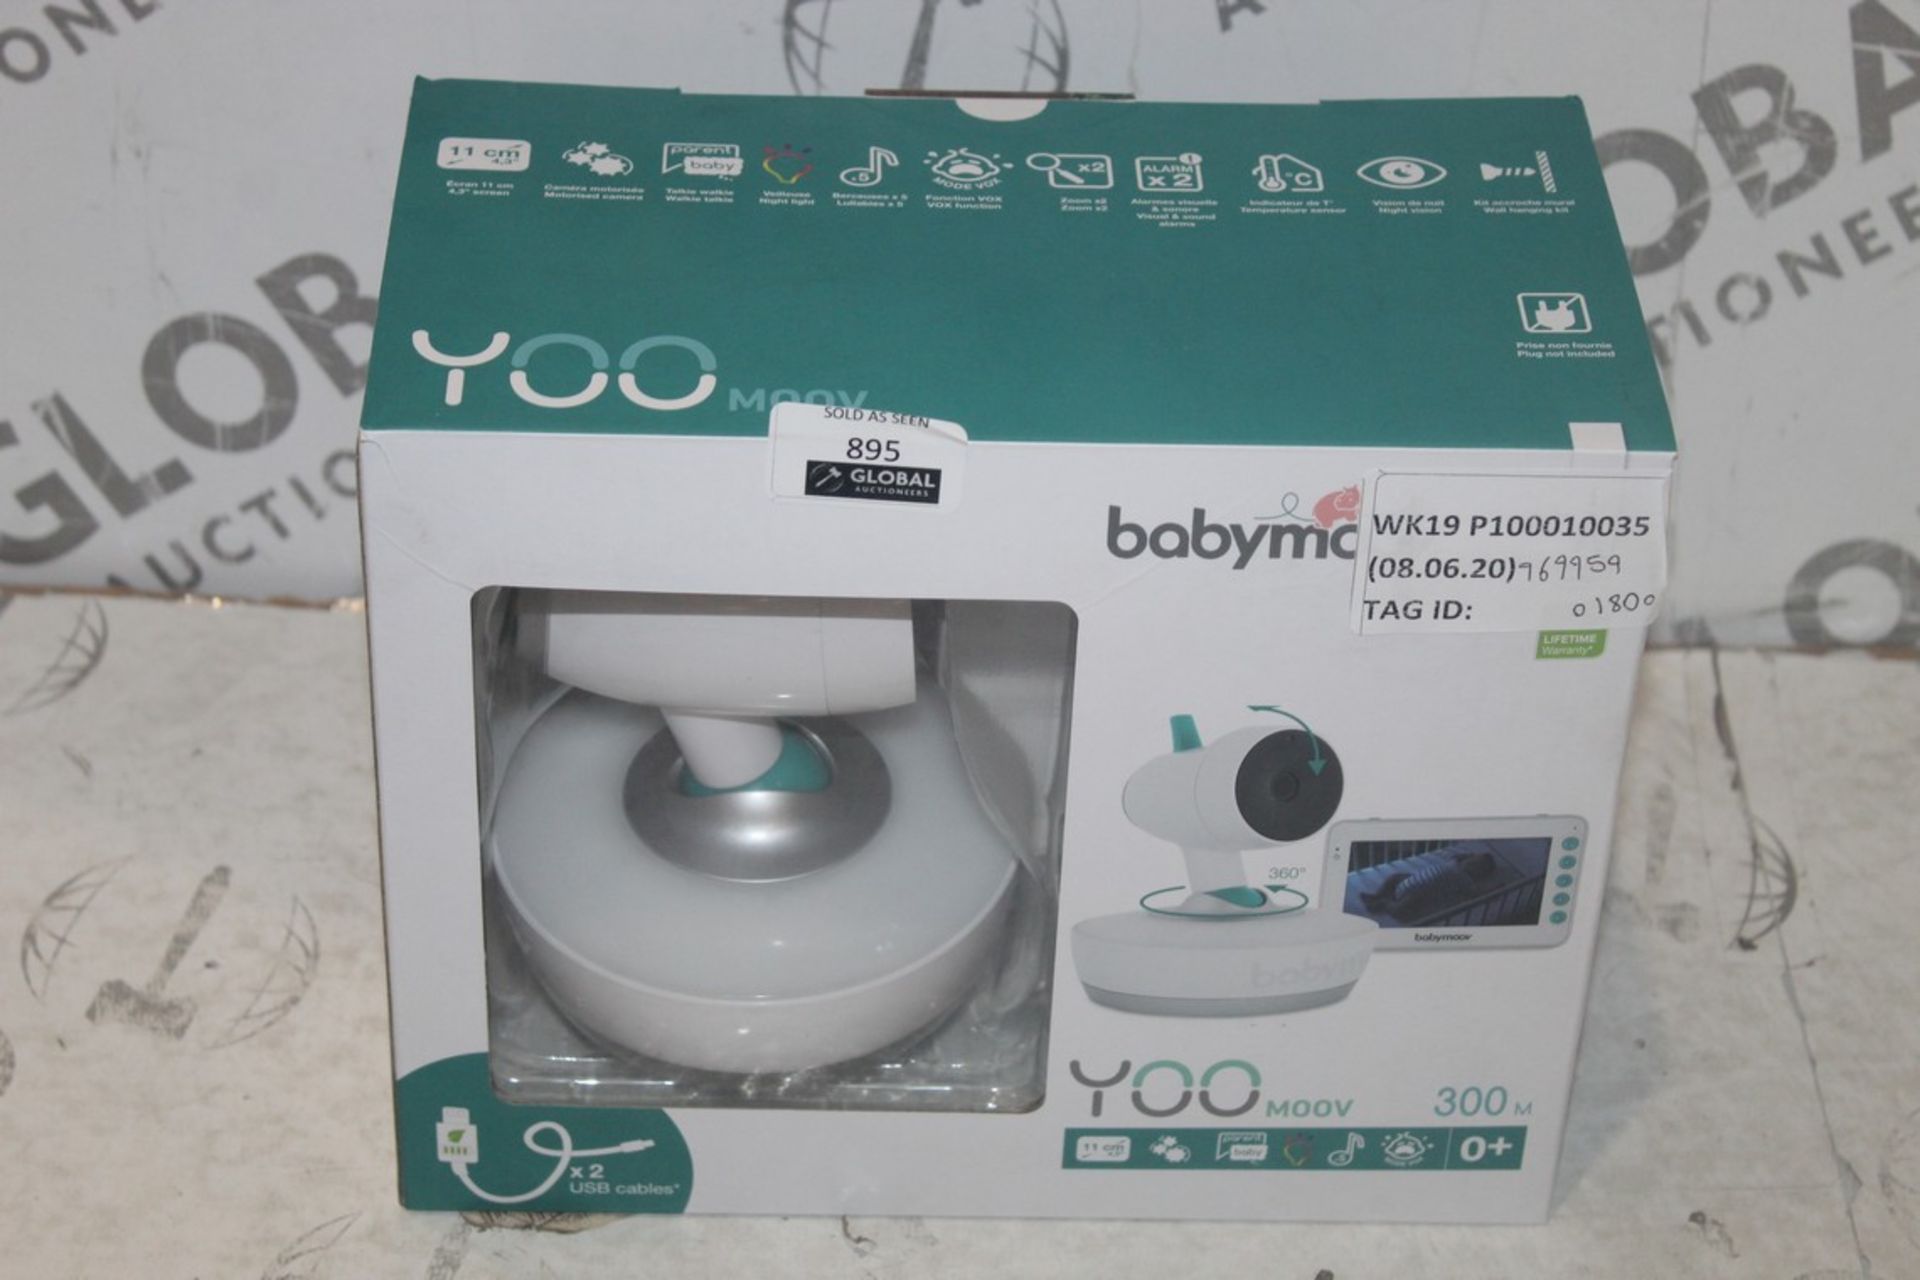 Boxed Babymoov Yoo Moov 300 Meter Range Digital Baby Monitor Set RRP £180 (969959) (Pictures Are For